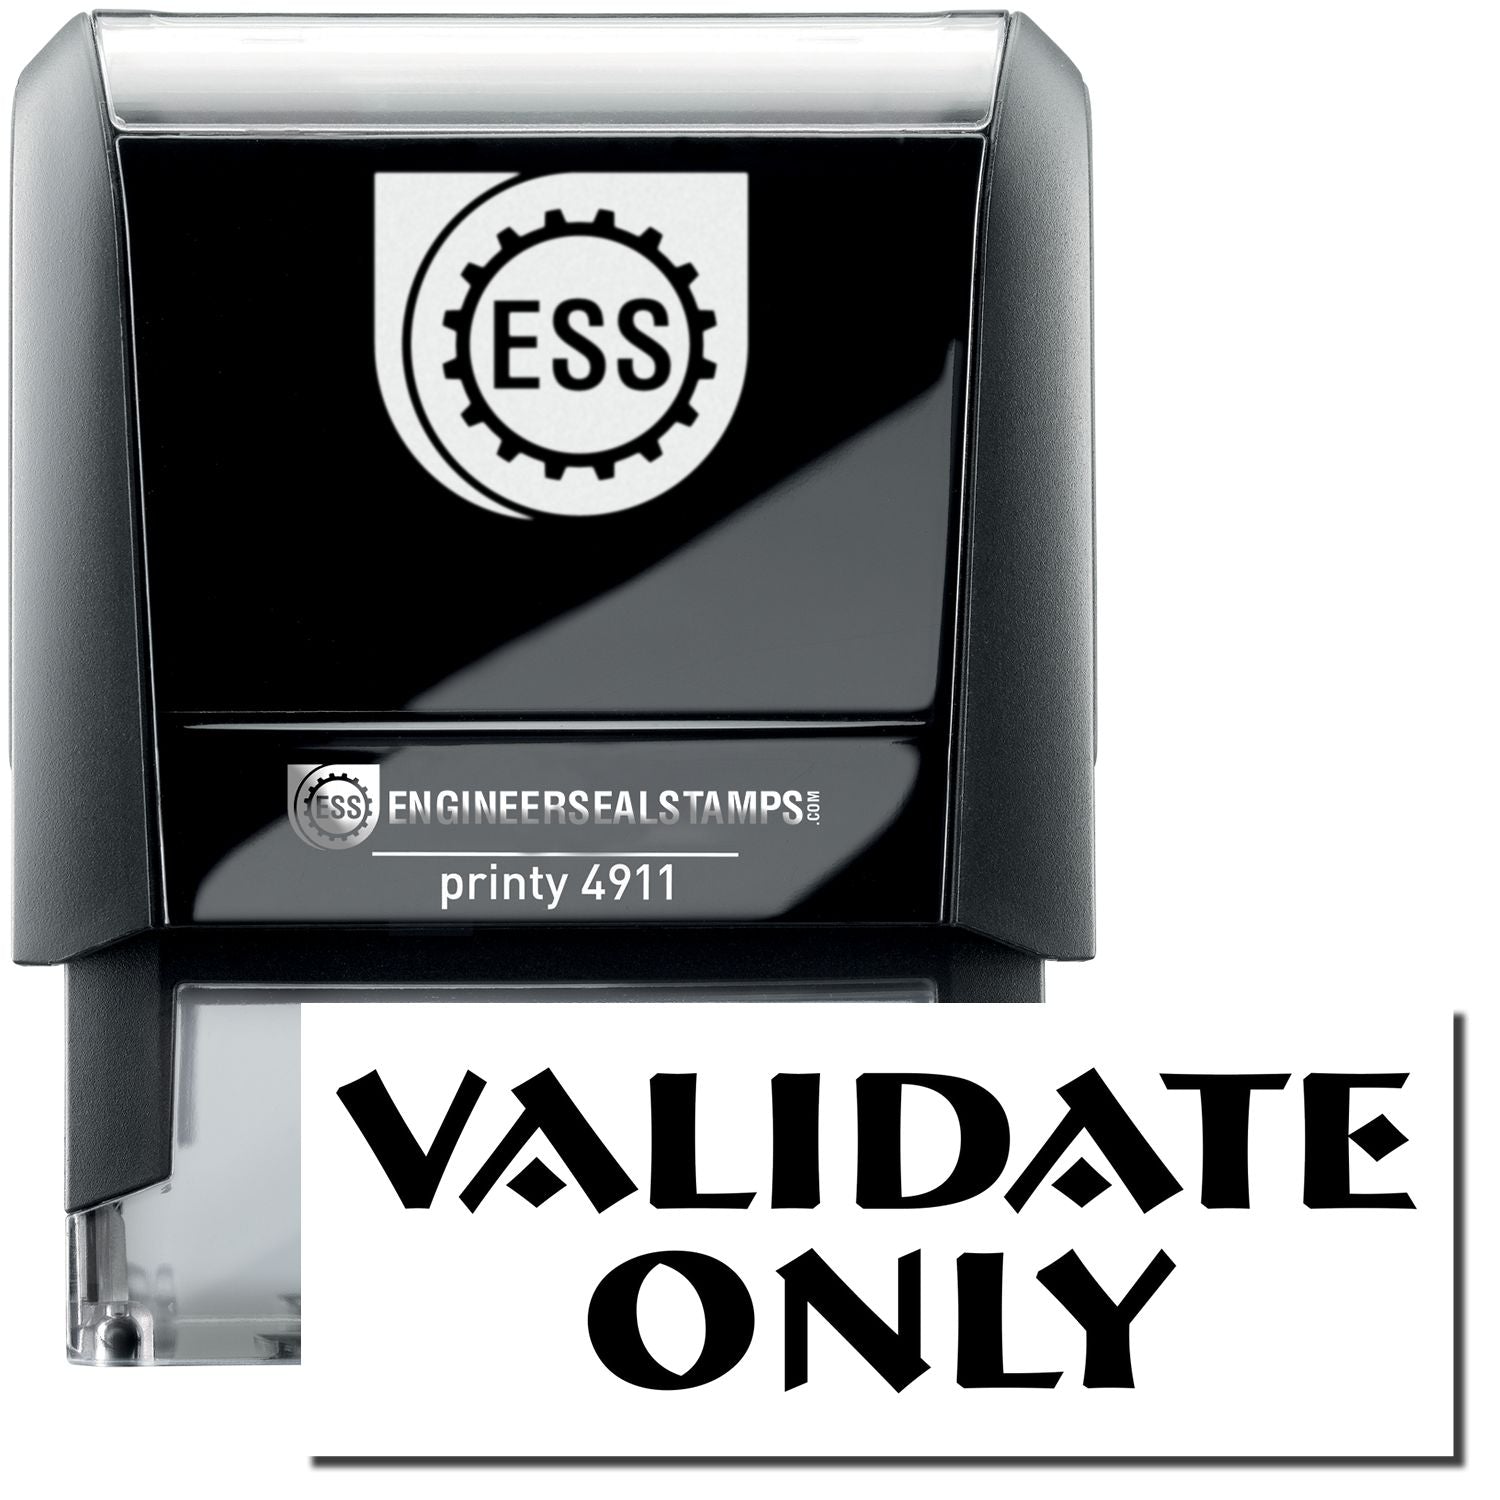 A self-inking stamp with a stamped image showing how the text "VALIDATE ONLY" is displayed after stamping.